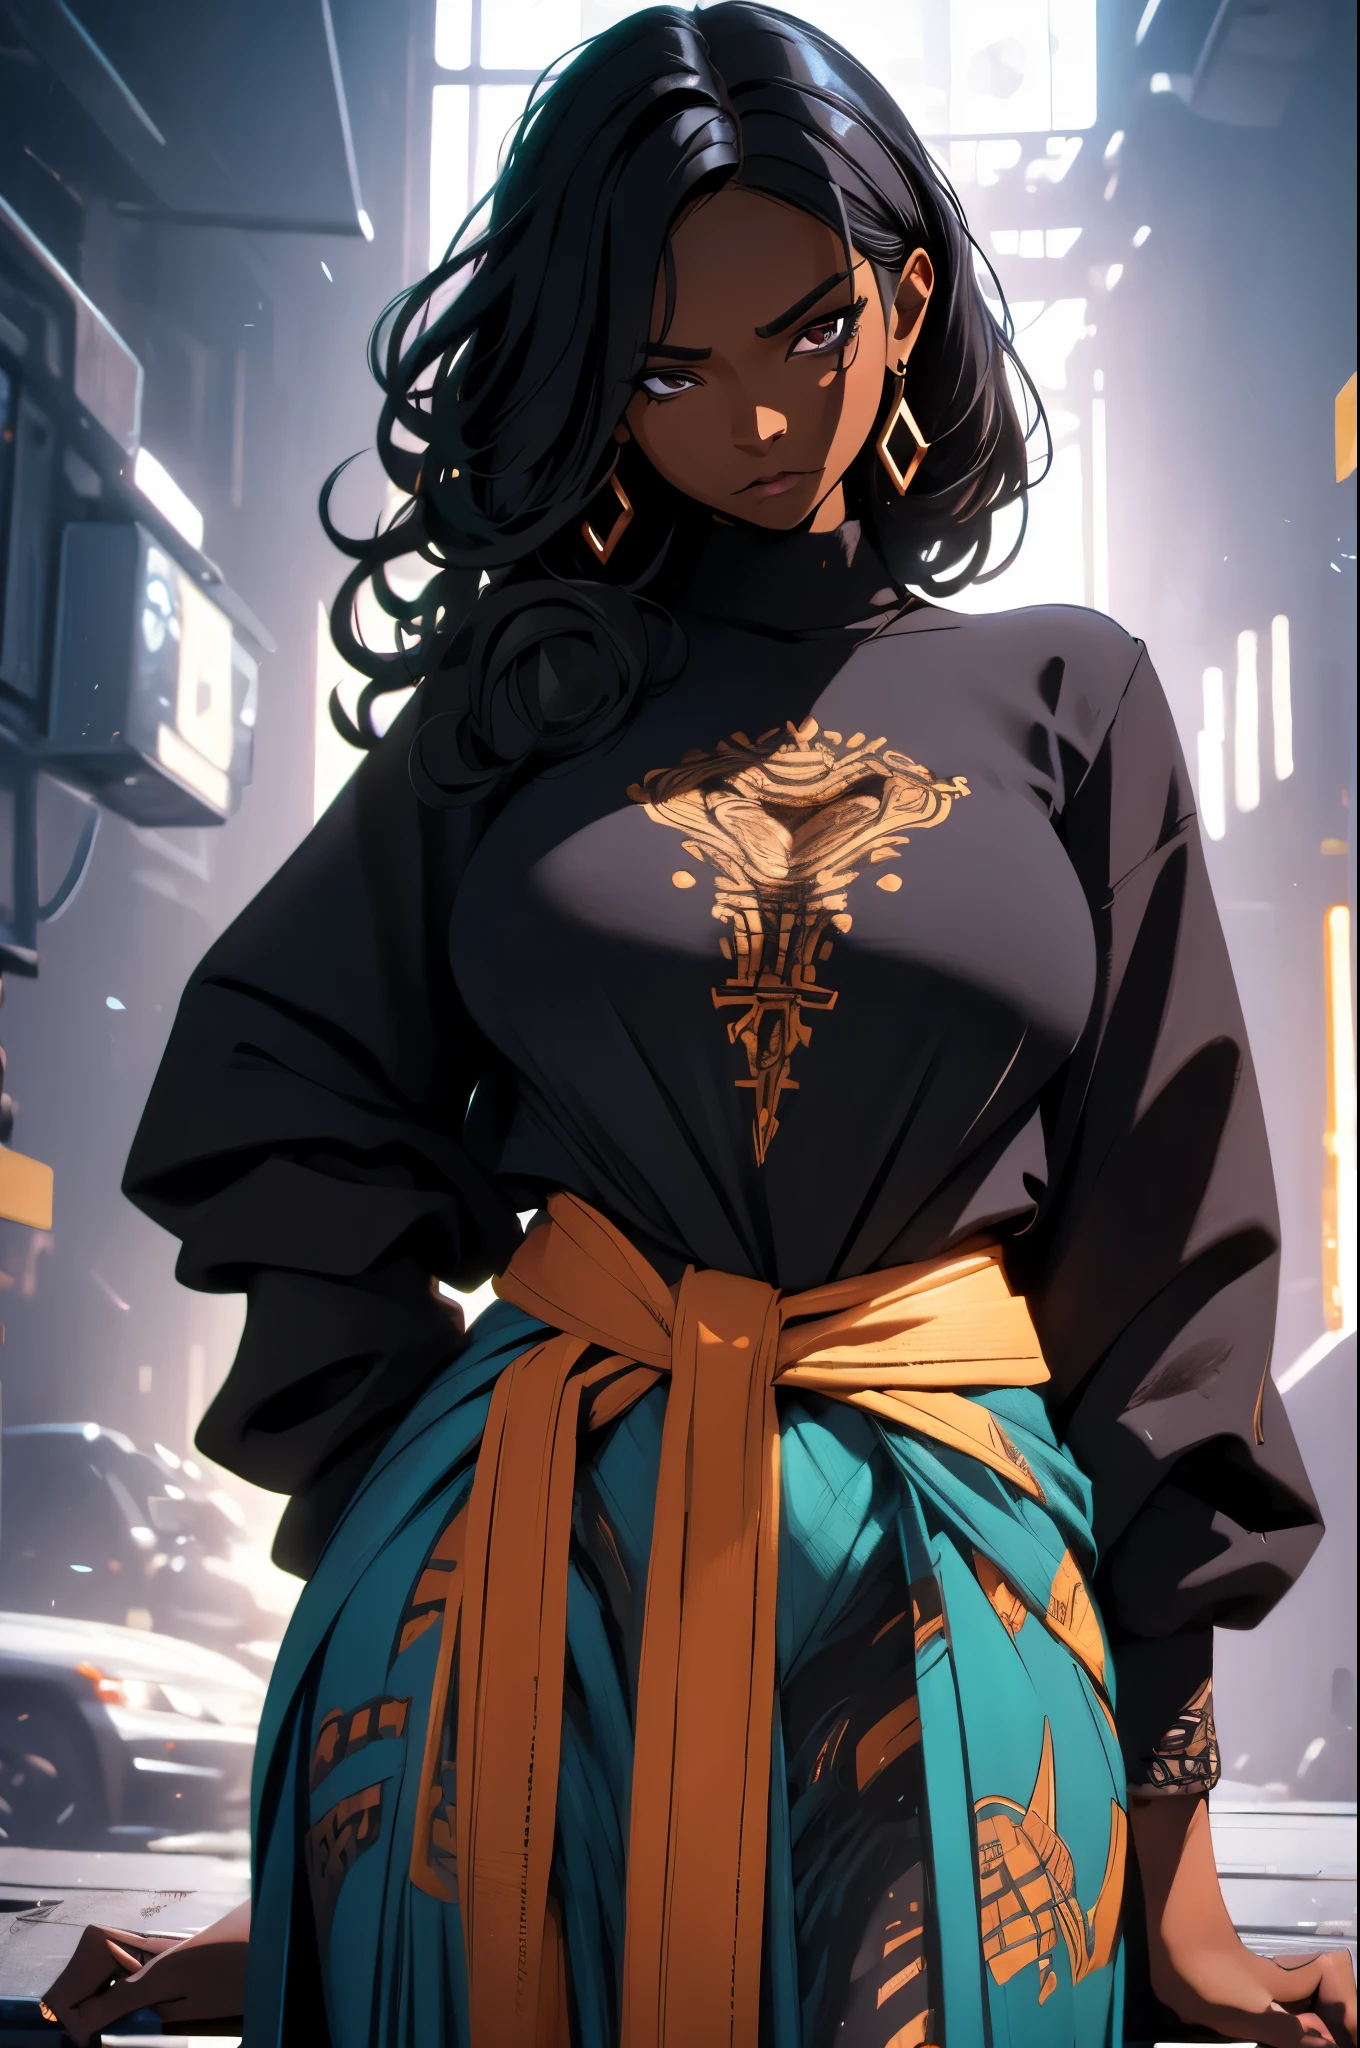 (super detail), high details, high quality, 8k, (masterpiece), best quality, dark skin, black woman, symmetrical, black hair, perfect face, intricate hair, side hair loop, black shirt, mommy dom, dominating figure, smug, intimidating, cold, great shading, mysterious figure.